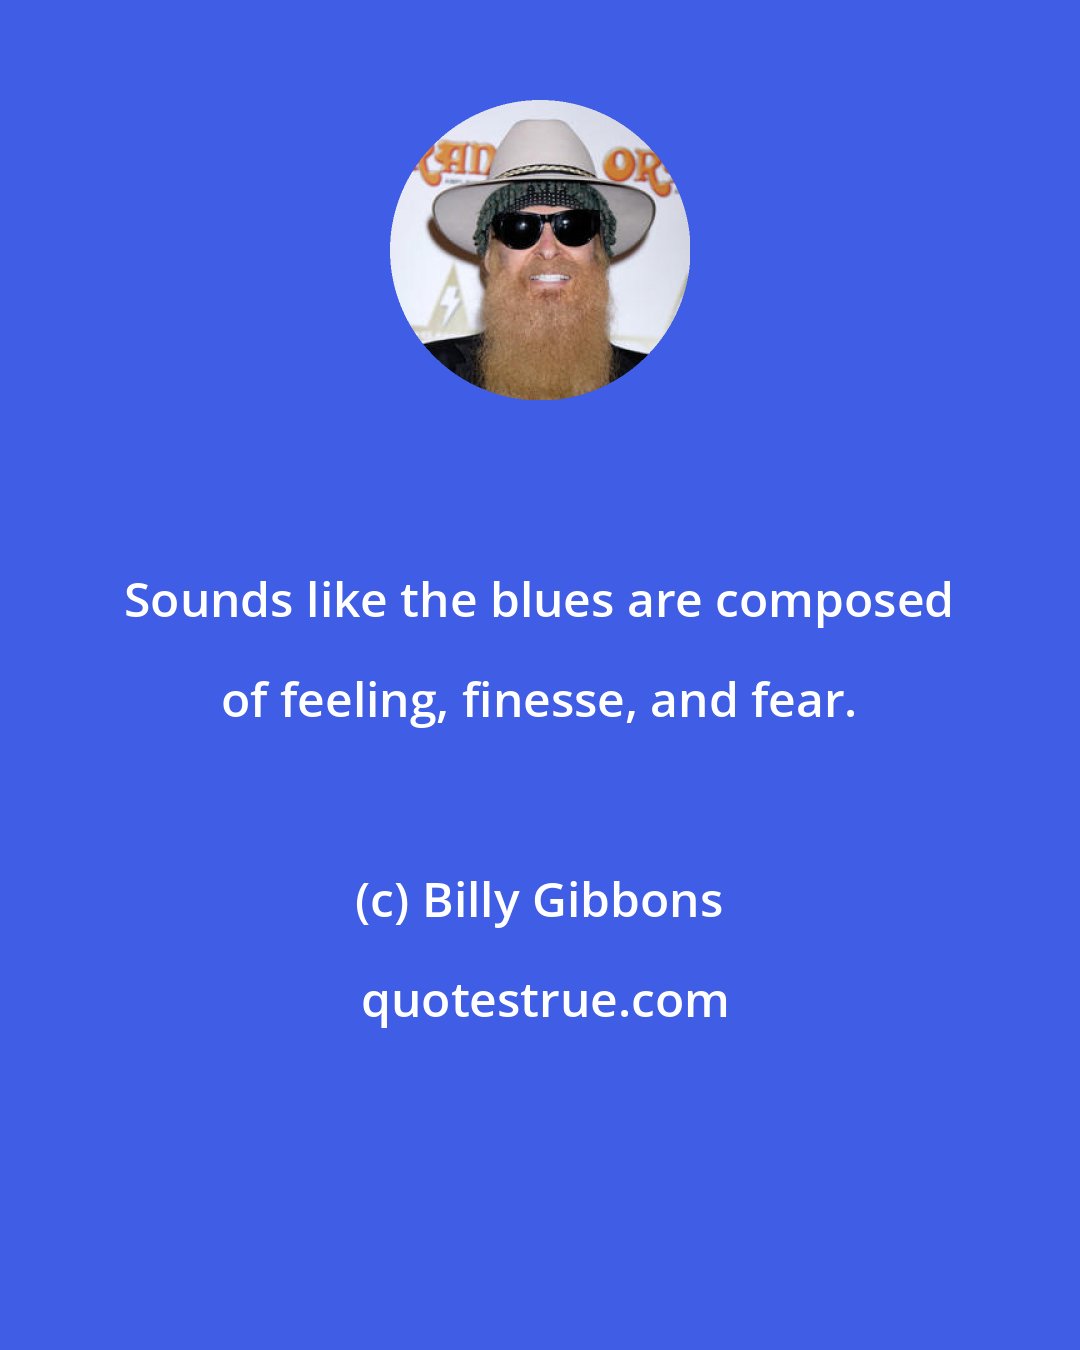 Billy Gibbons: Sounds like the blues are composed of feeling, finesse, and fear.